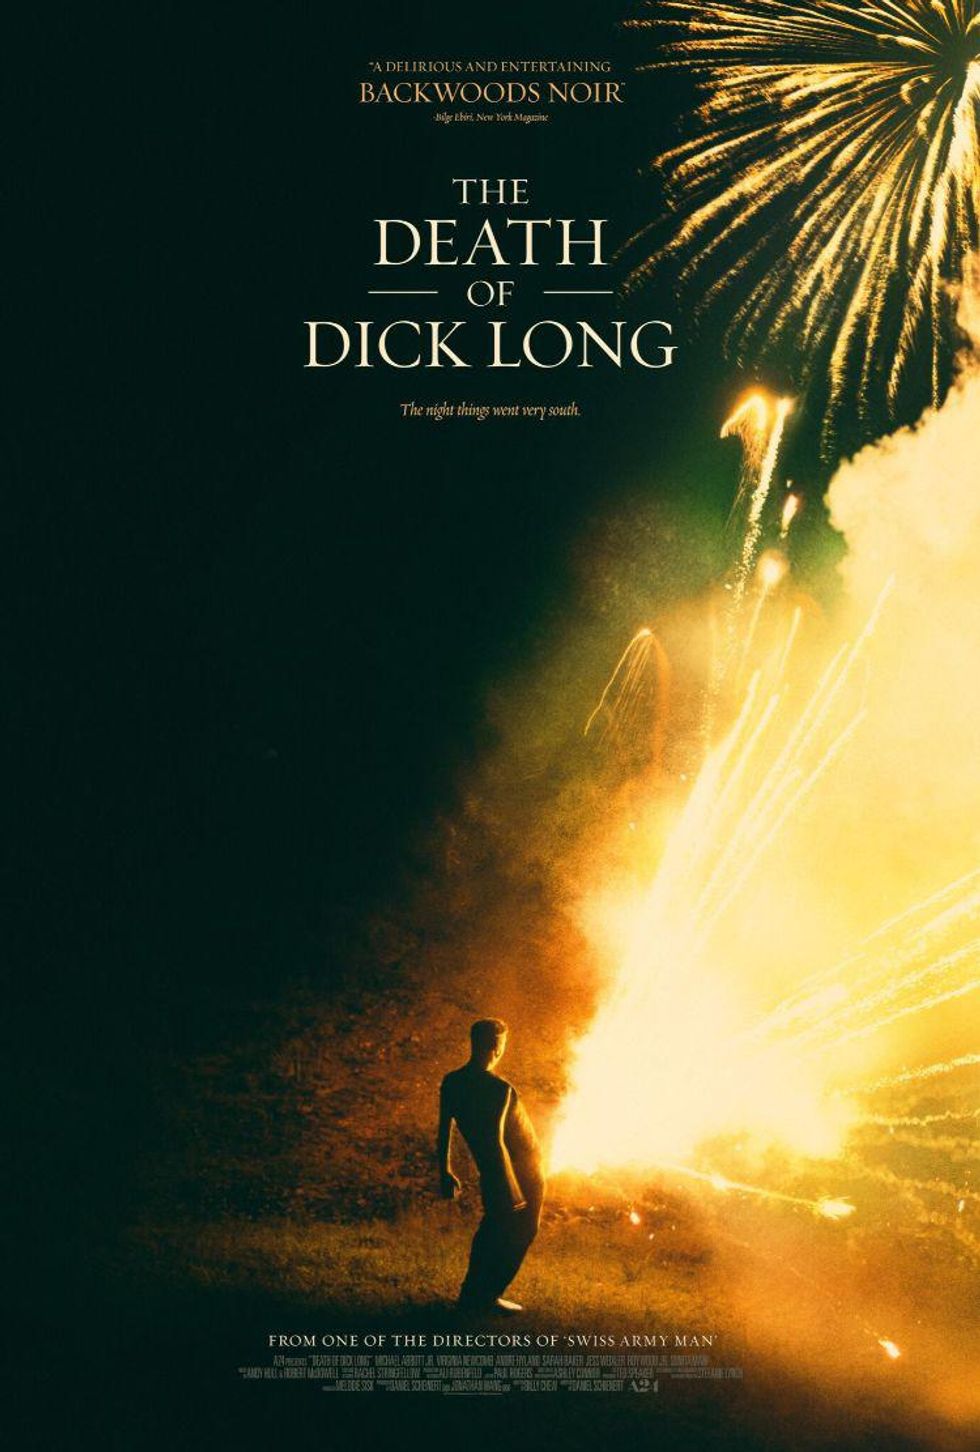 'The Death of Dick Long' Is a Wild—and Queer Inclusive—Ride